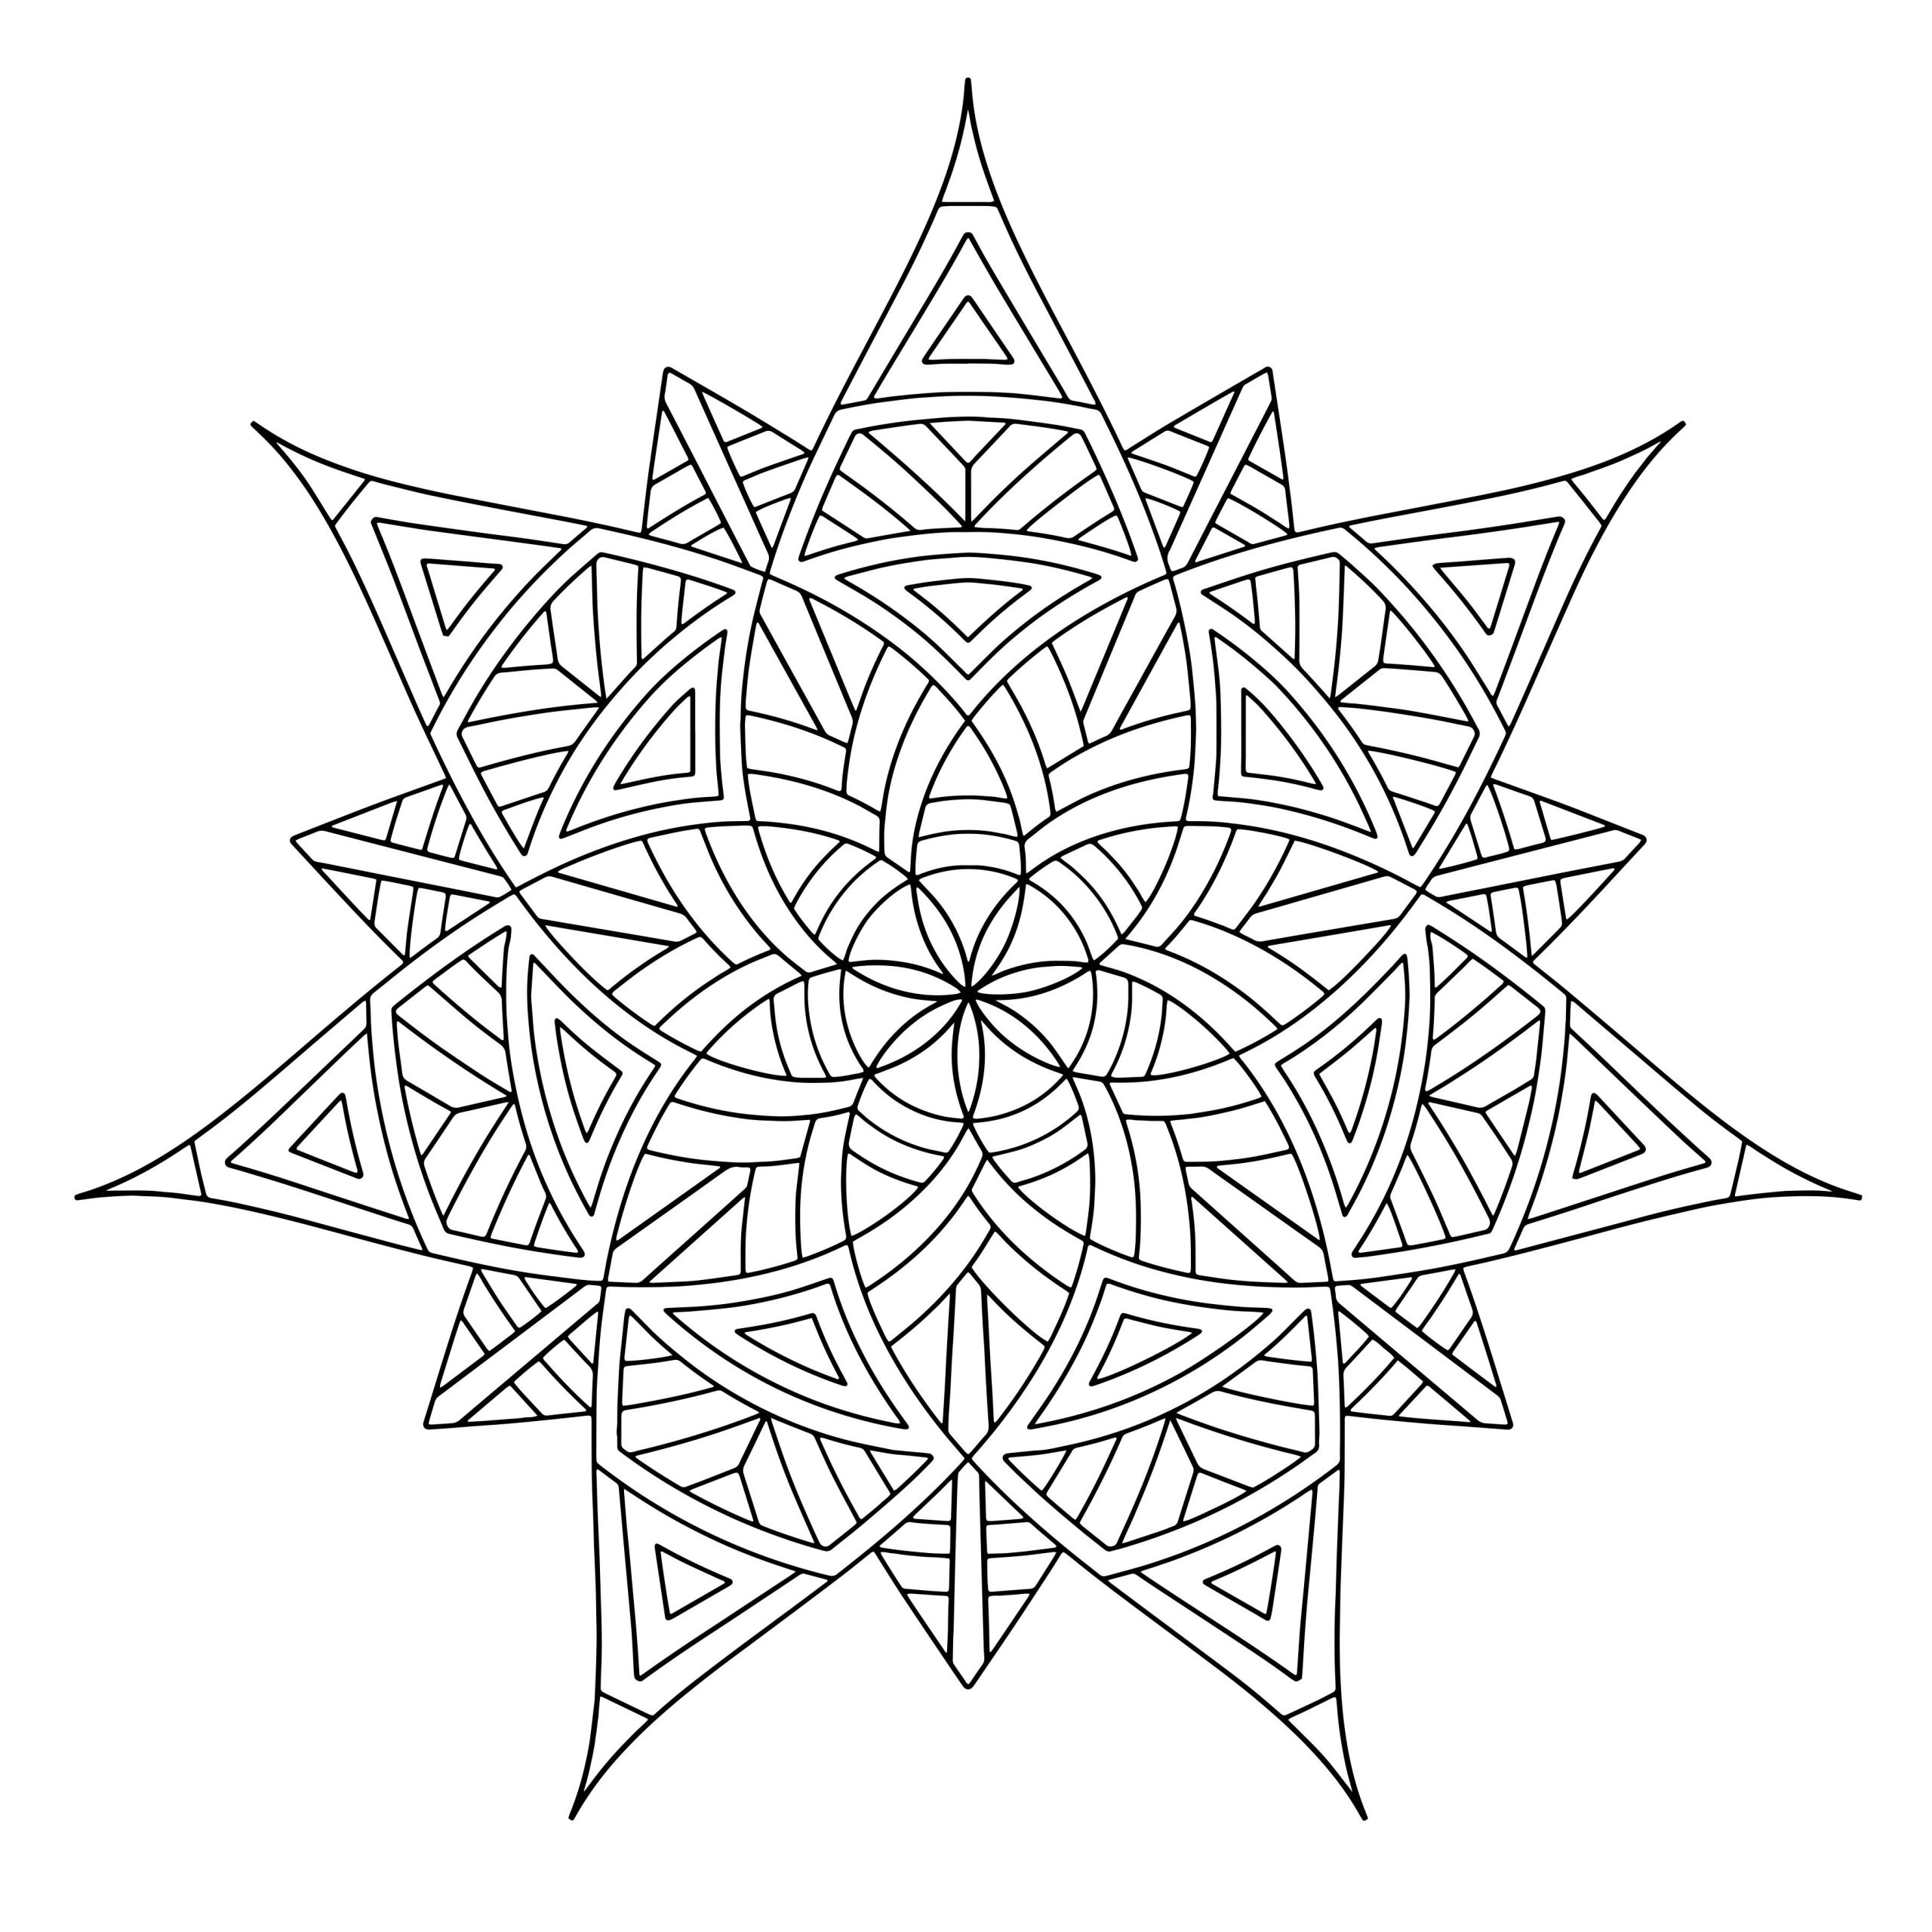 Geometric Adult Coloring Pages
 Free Printable Geometric Coloring Pages for Adults